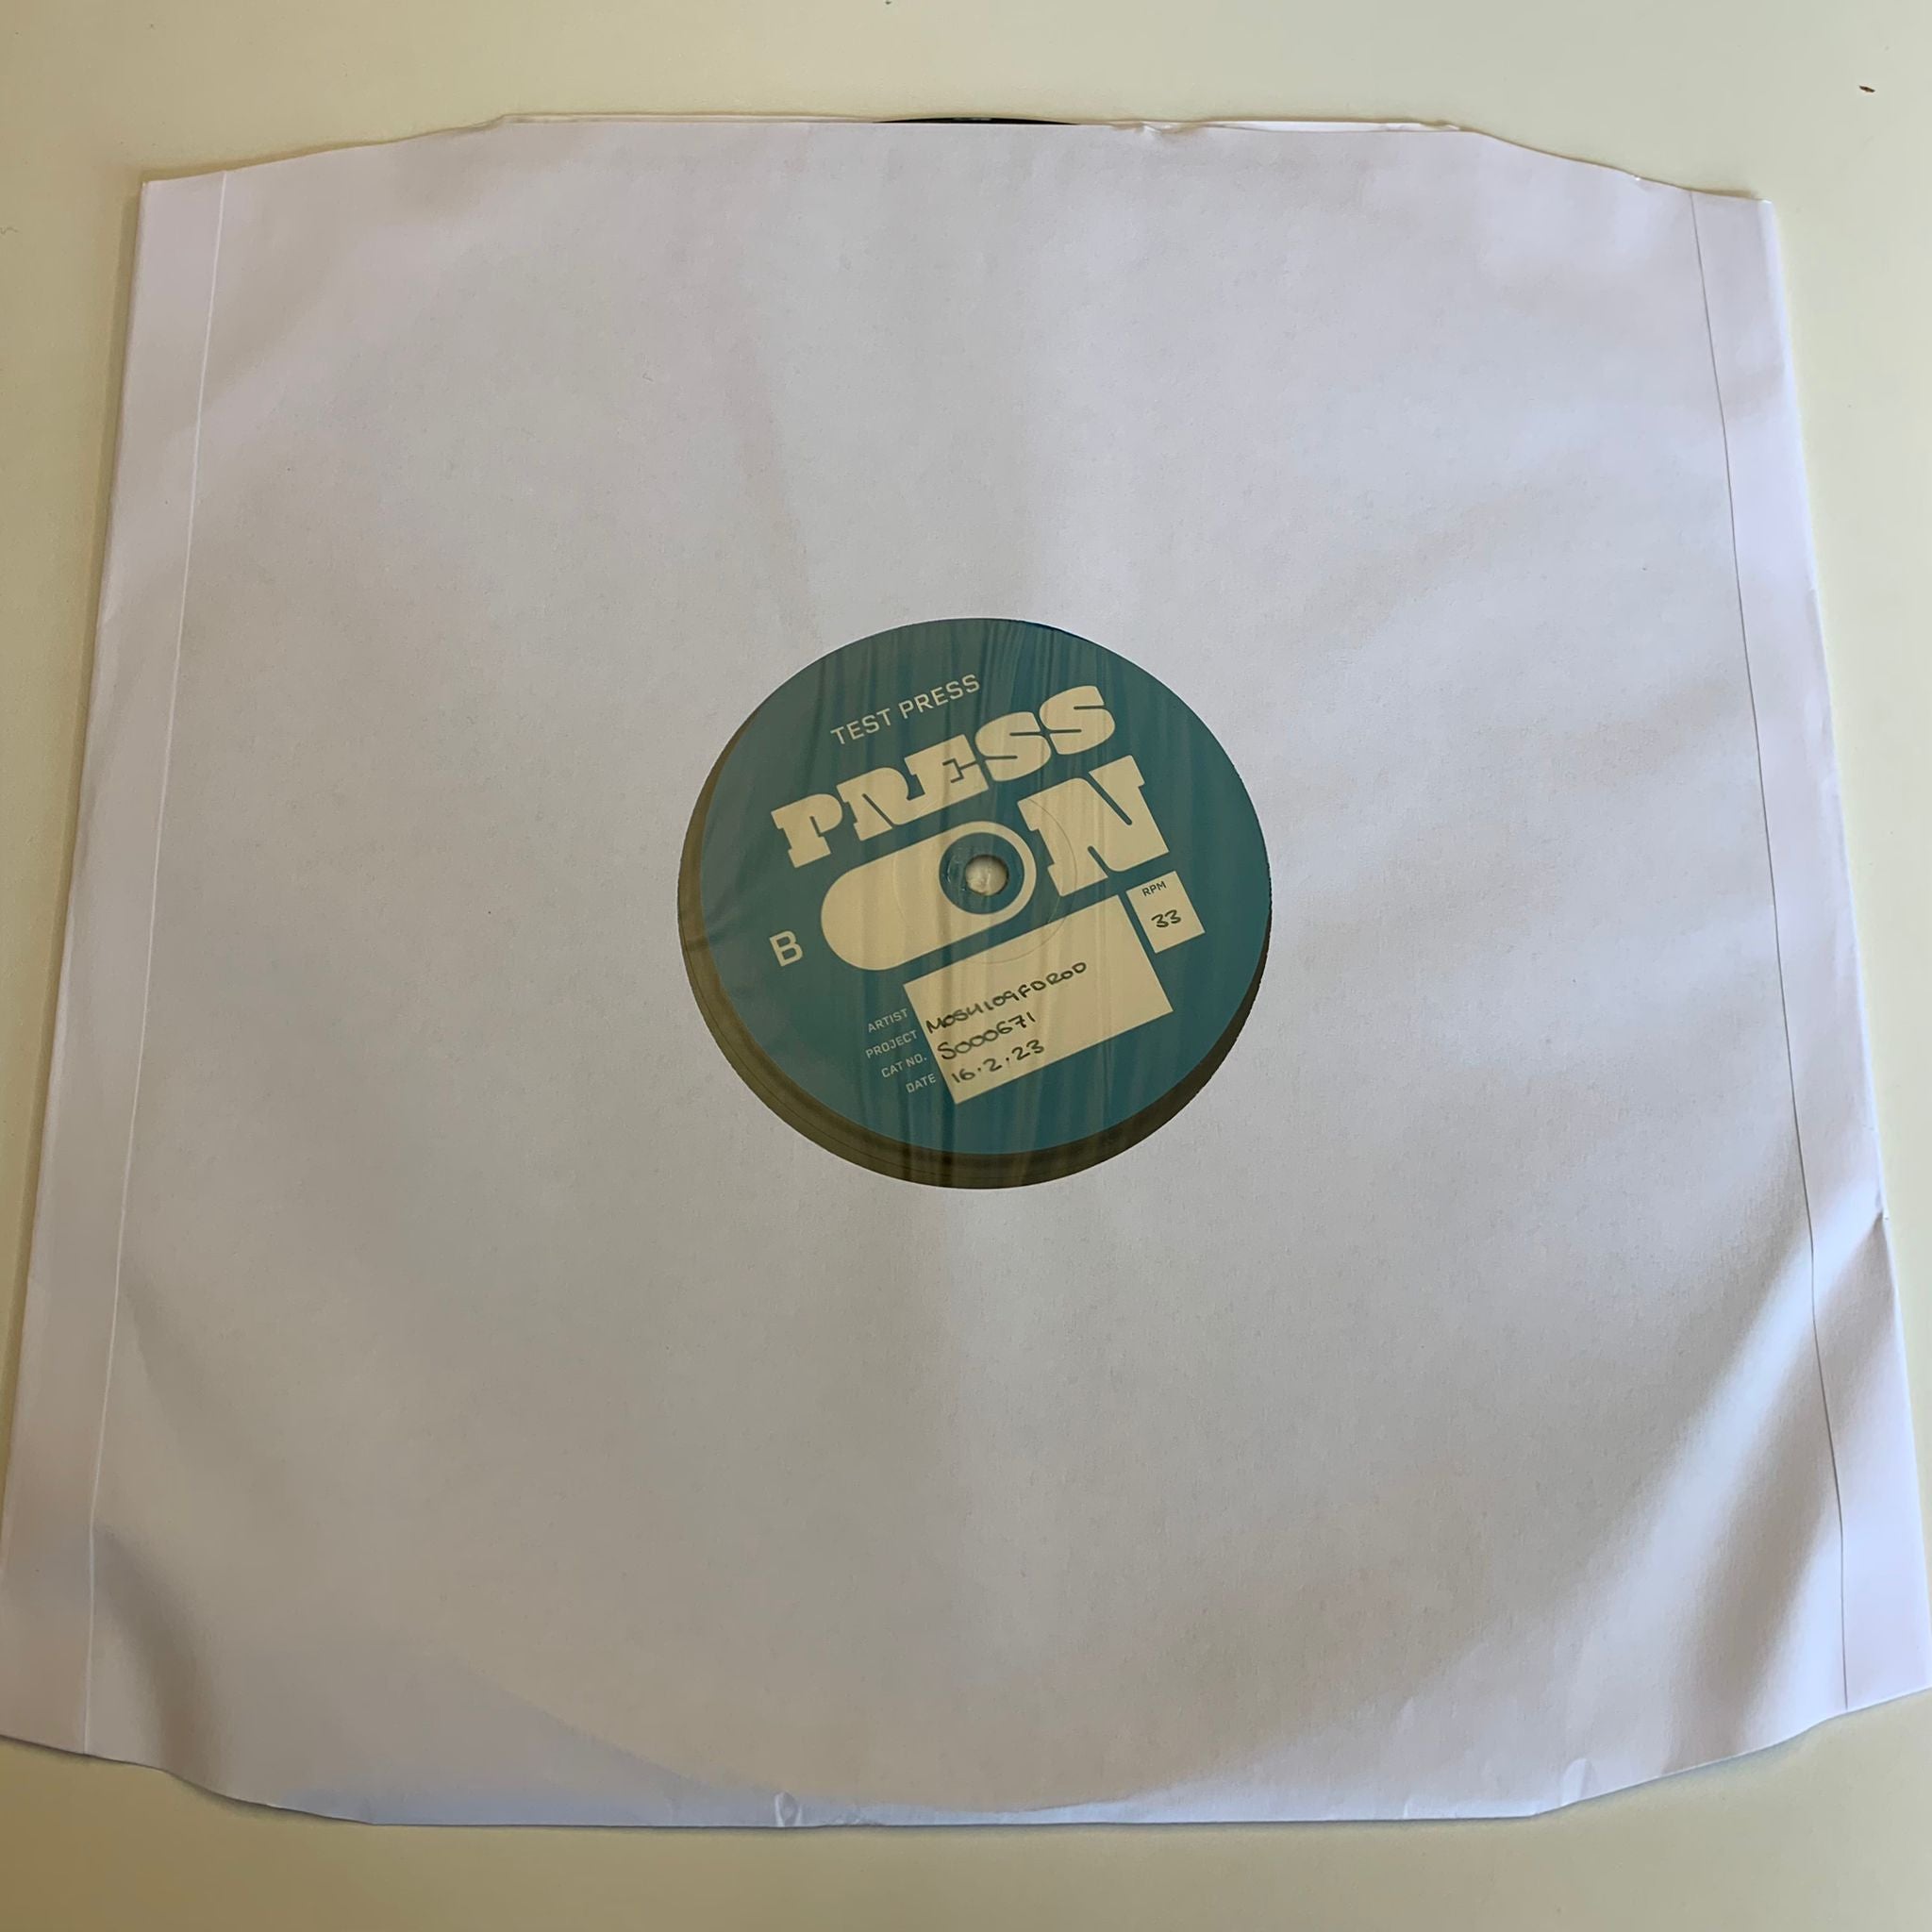 Green Druid "At The Maw Of Ruin" Test Pressing